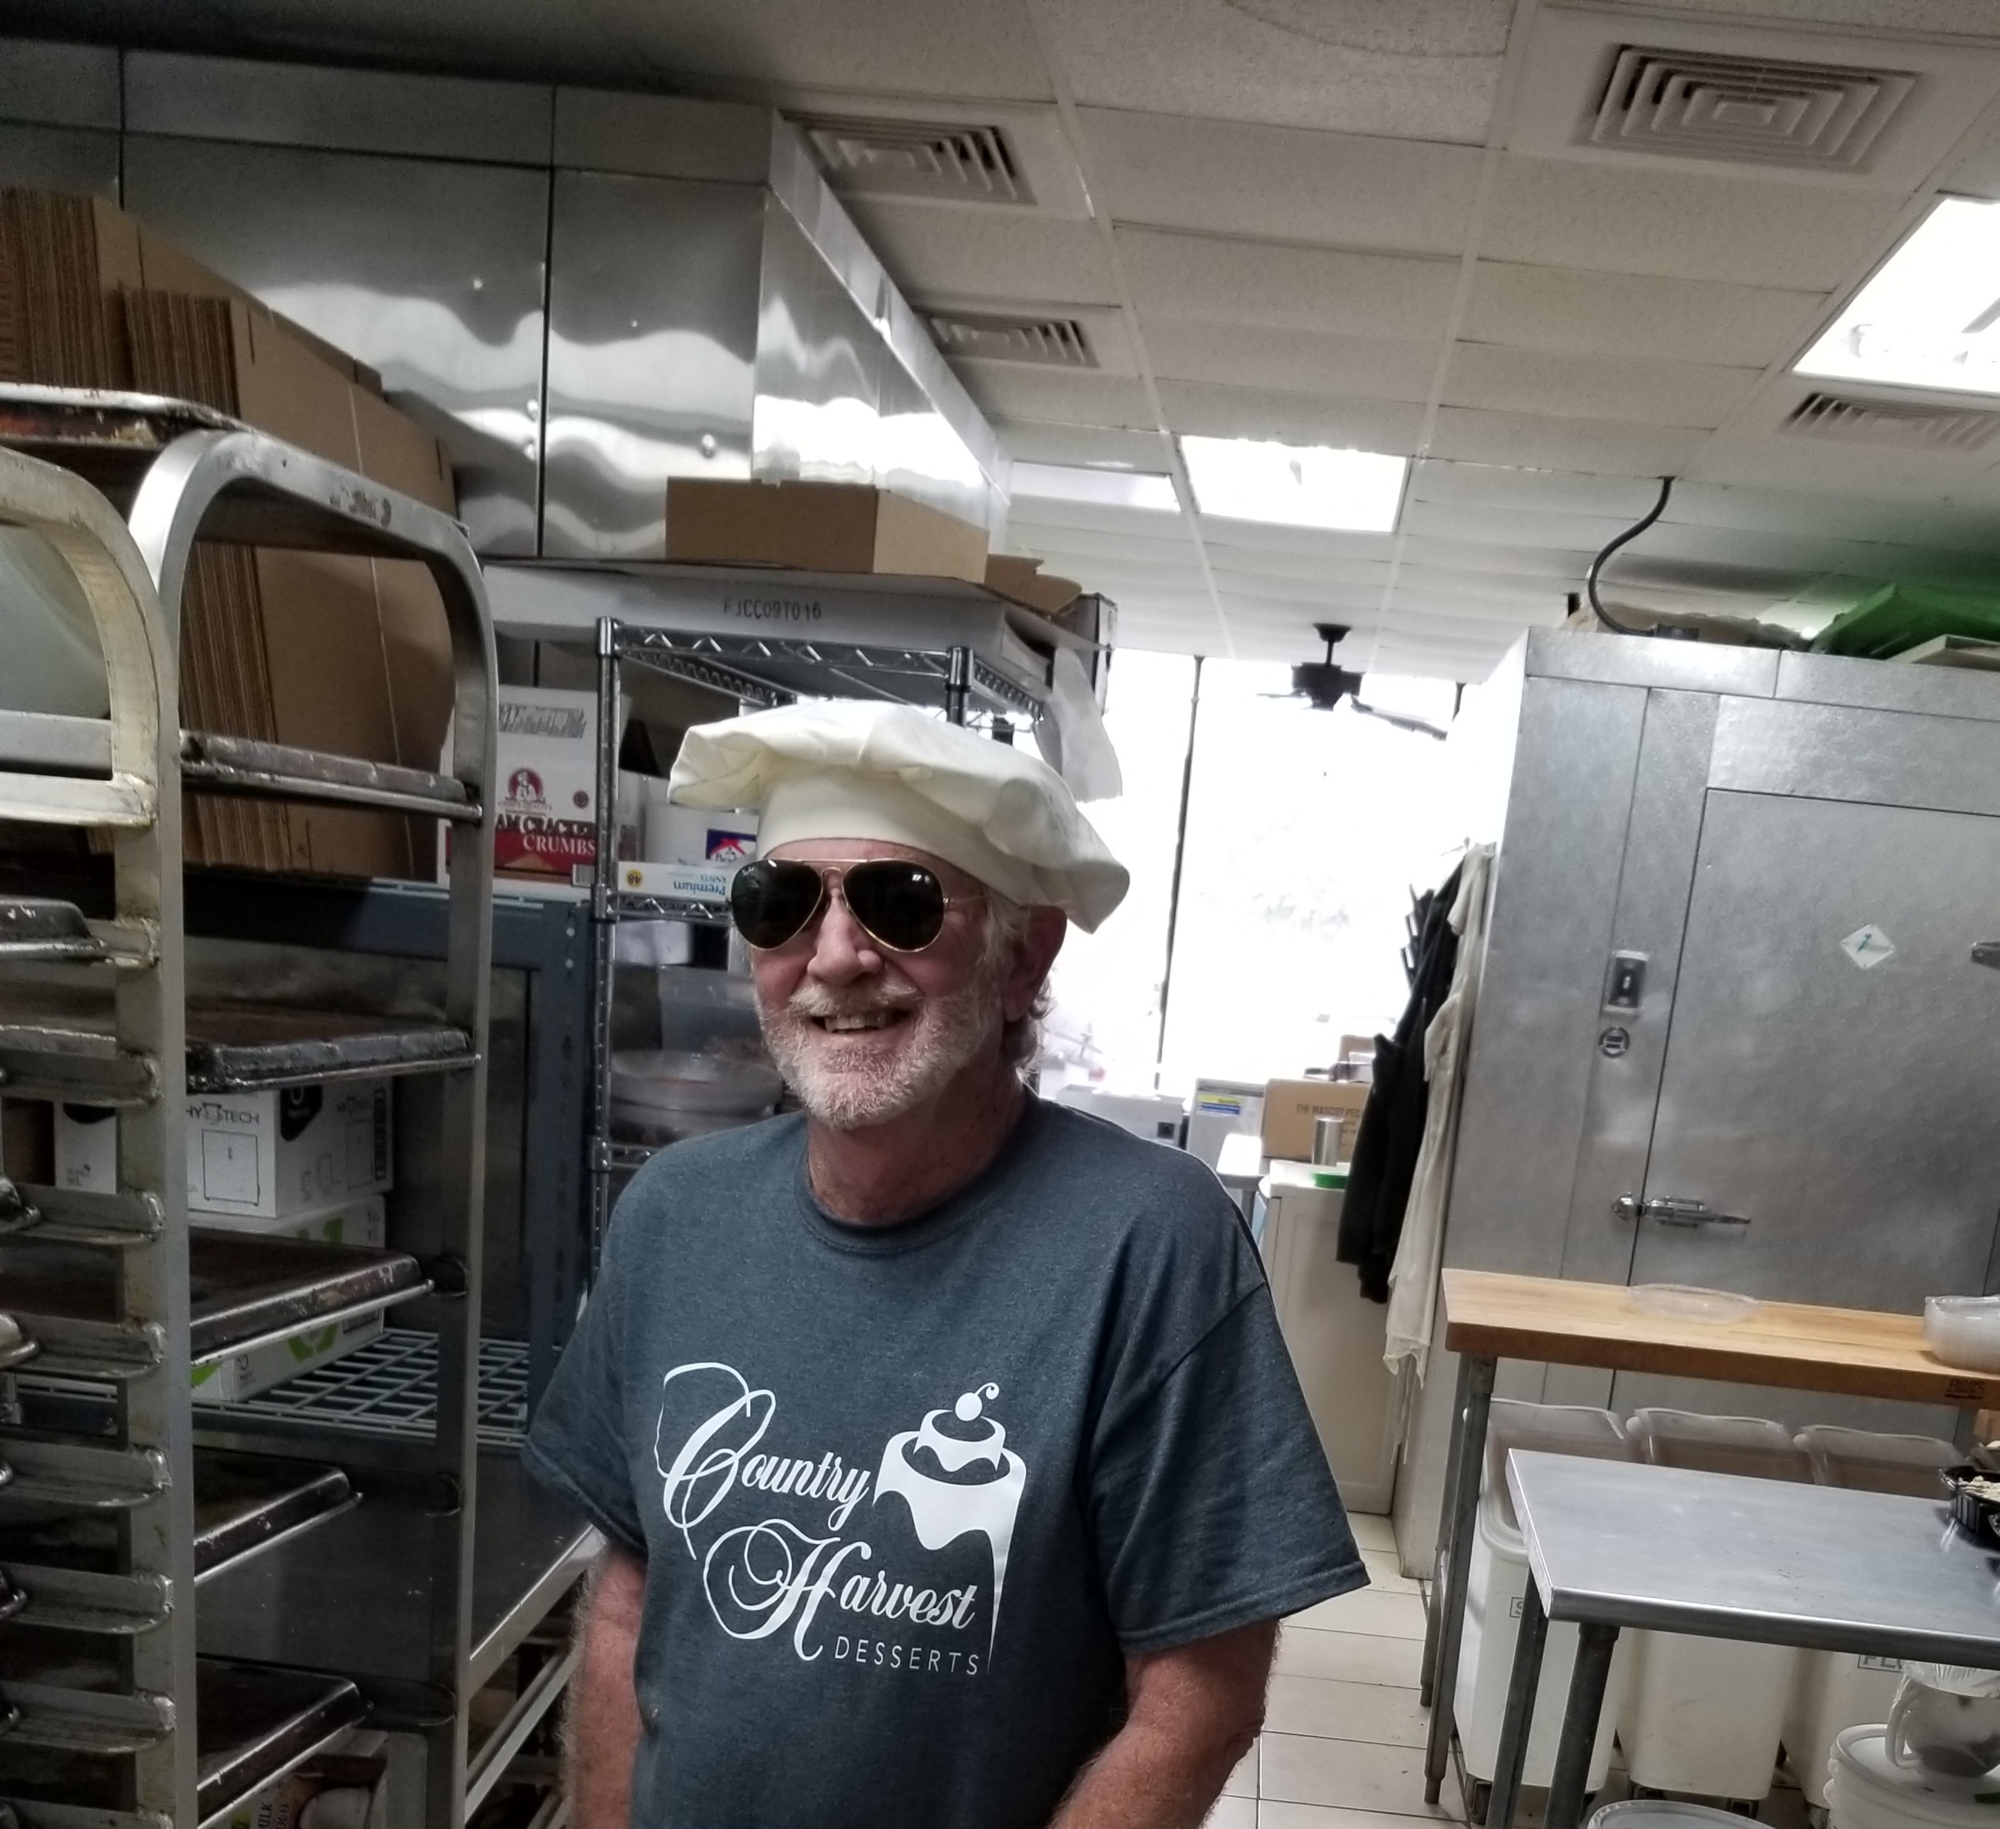 Country Harvest Desserts owner Jonathan Eddy said delivery driver Thomas Cody “is appreciated not only for his driving (apparently never needing directions), but also for bringing a positive vibe to the kitchens where he delivers.